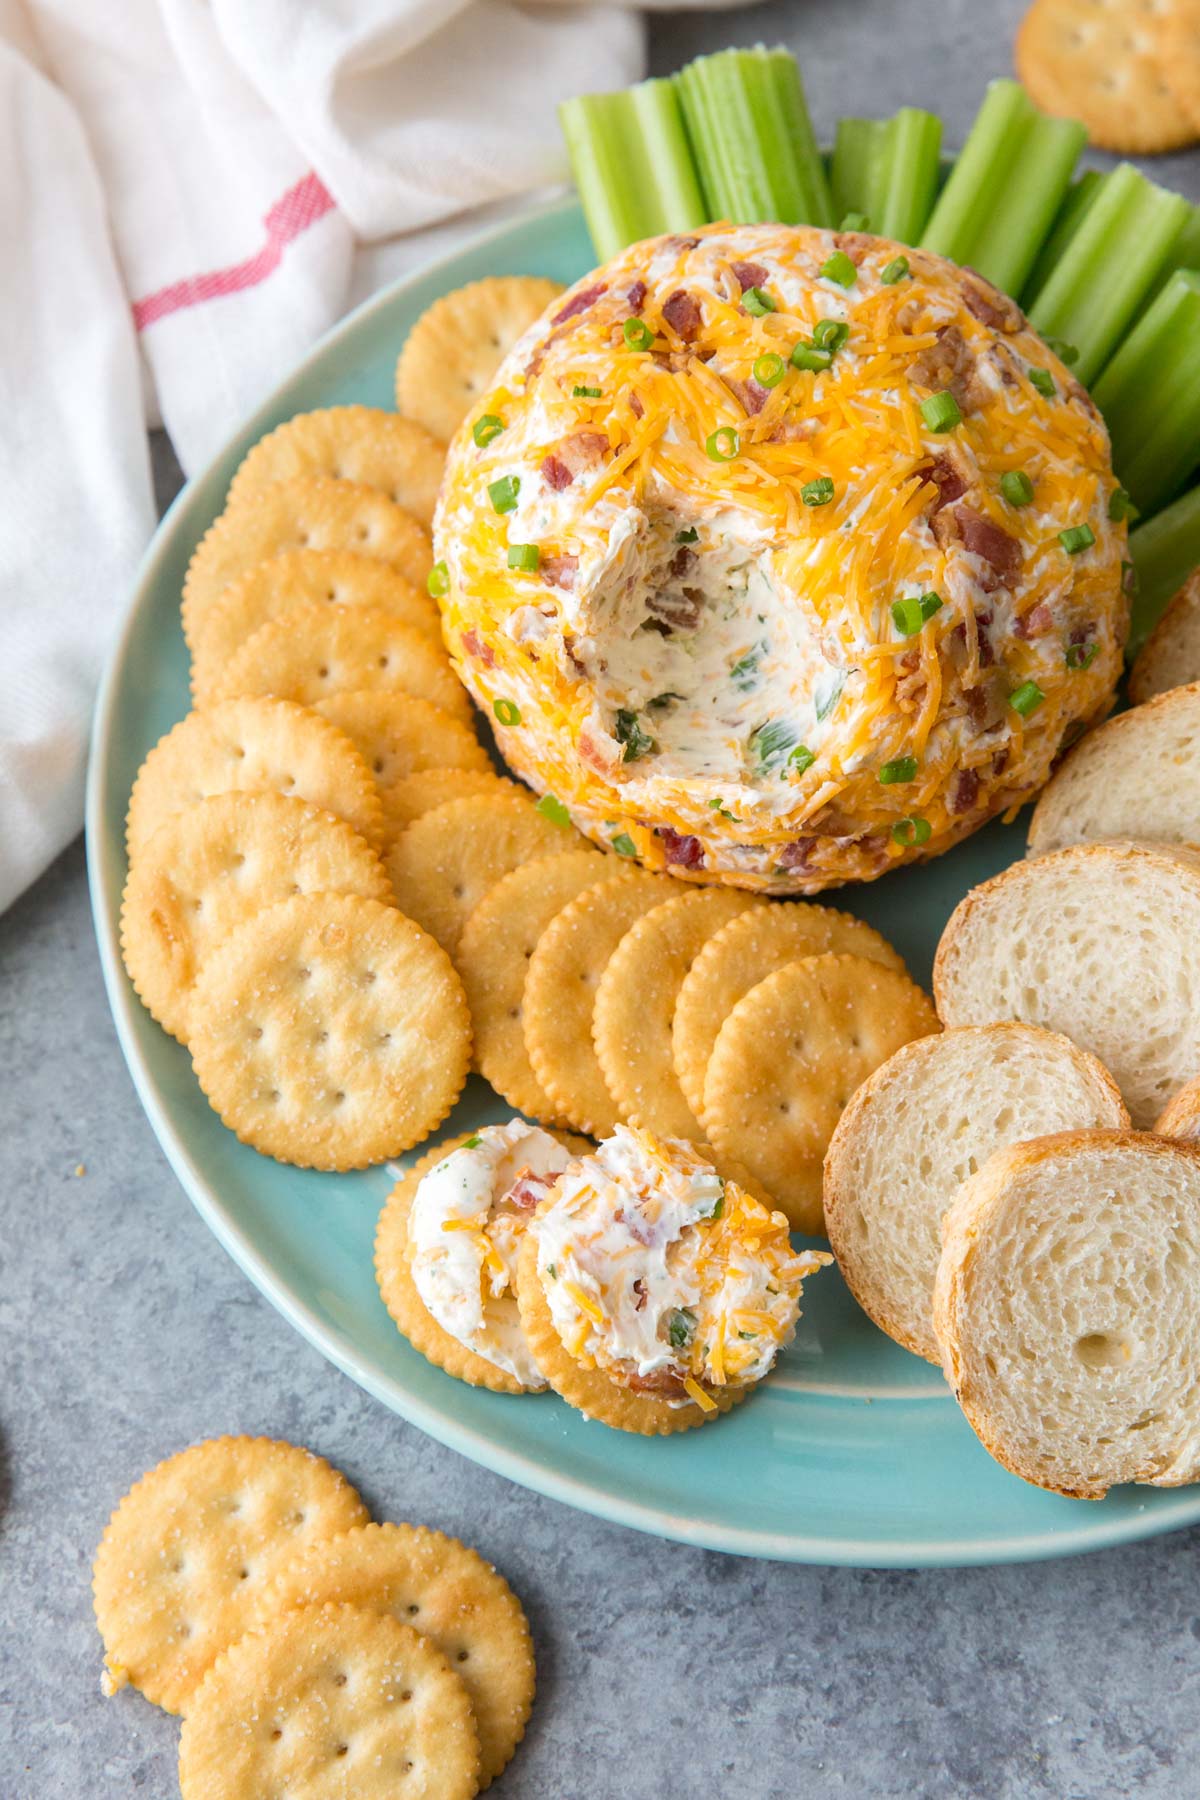 bacon cheddar cheeseball with crackers on a blue plate